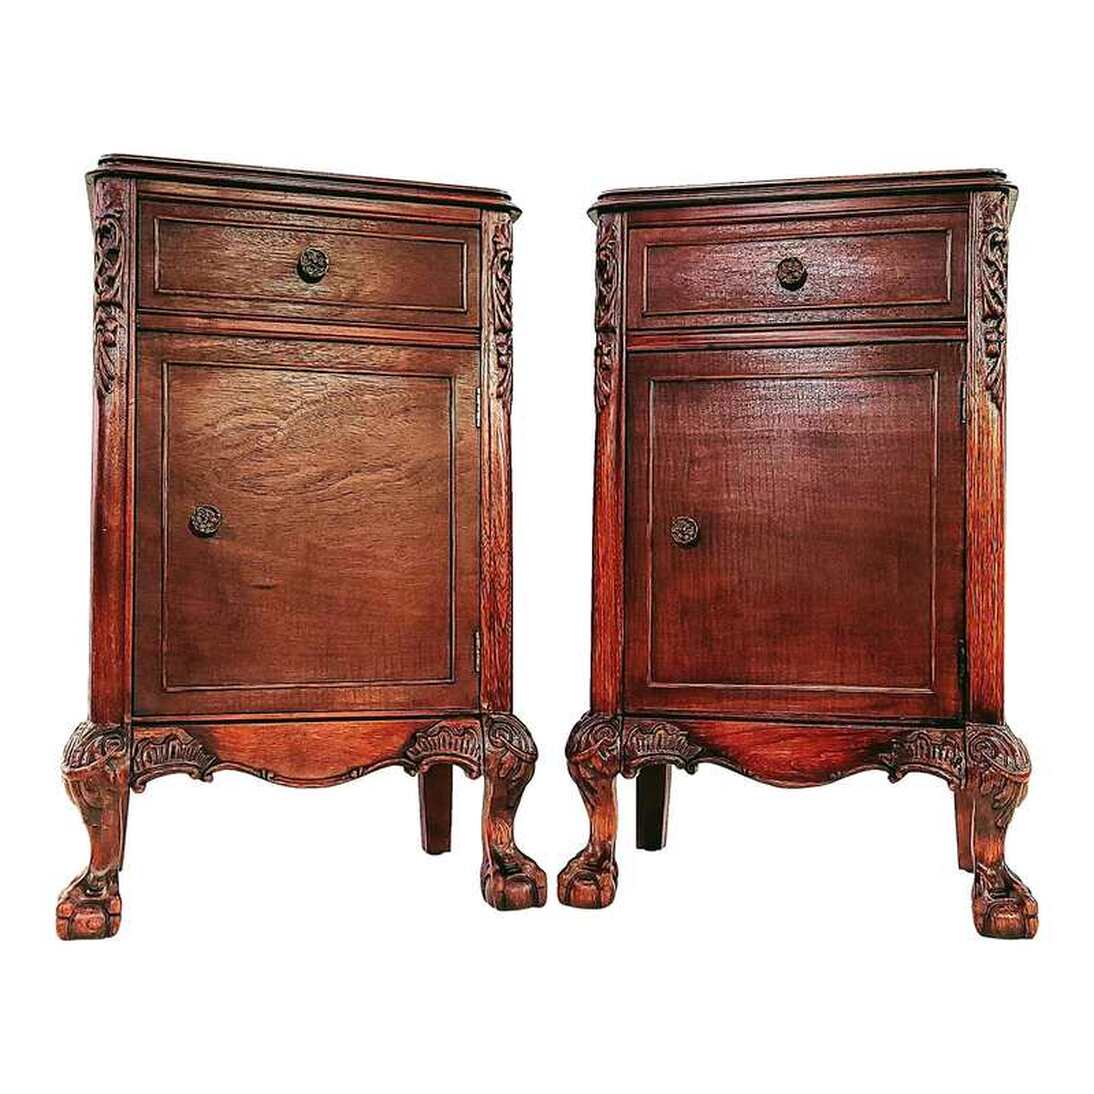 Vintage circa 1930s Joerns Brothers Furniture Company Chinese Chippendale style nightstands.  Pair of nightstands feature a refinished exterior with a classic mahogany tone finish over mixed fruit woods of burl and mottled figures.  The flat tops have molded edges.  The fronts offer access to one top drawer and a single-door cabinet. The drawers and doors are decorated with raised molding, referencing cock-beading on Georgian furniture. The drawers and doors open with a pull on the round chased brass chrysanthemum knobs.  The curved front stiles are decorated with carved foliate pendants and end in cabriole ball-and-claw feet with acanthus leaves and swags on the knees. On either side of the feet, on the curved aprons, are curved and carved wood appliques.  The straight rear stiles end in squared tapered feet.  The sides are constructed with inset panels . One nightstand has top rails applied to the sides, the other does not.  SIZE:  17.75